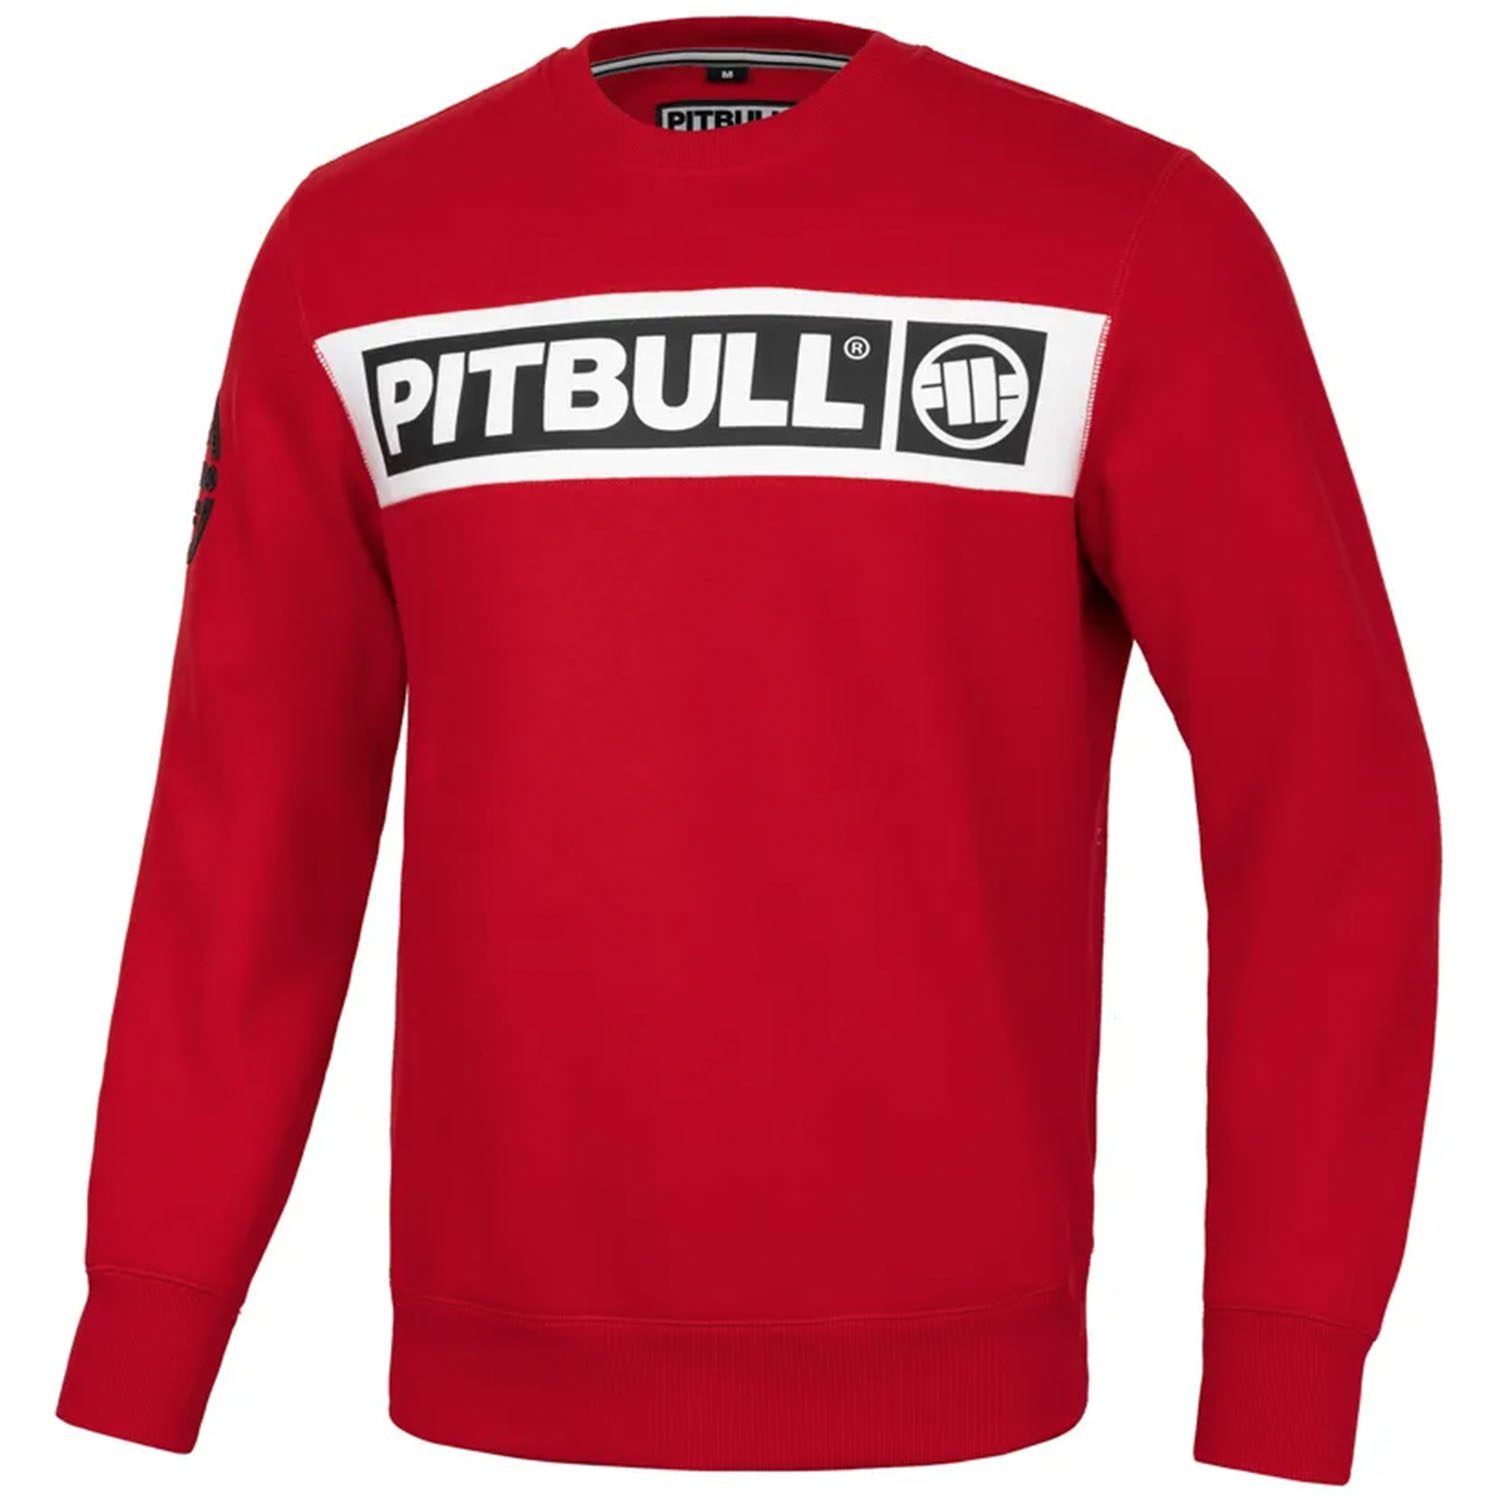 Pit Bull West Coast Pullover, Sherwood, red